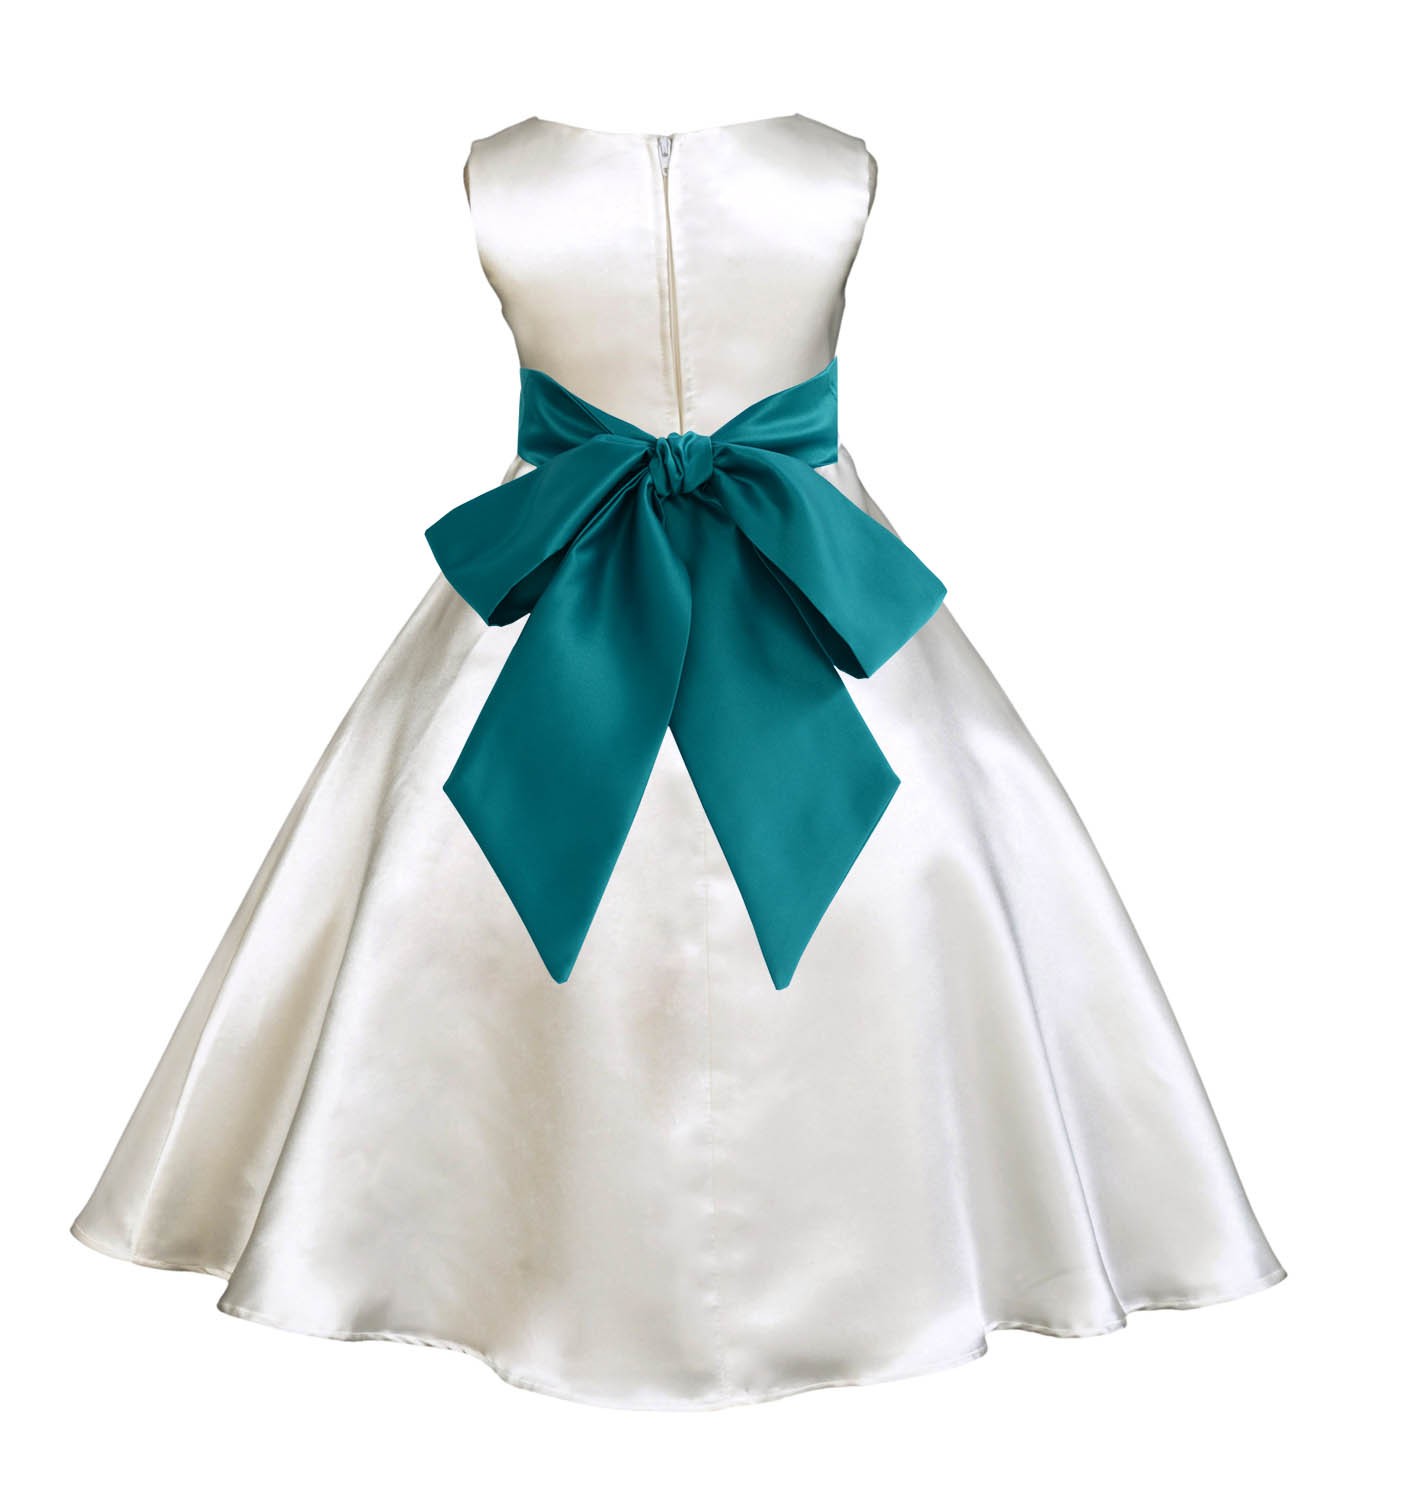 Ivory/Oasis A-Line Satin Flower Girl Dress Pageant Reception 821S